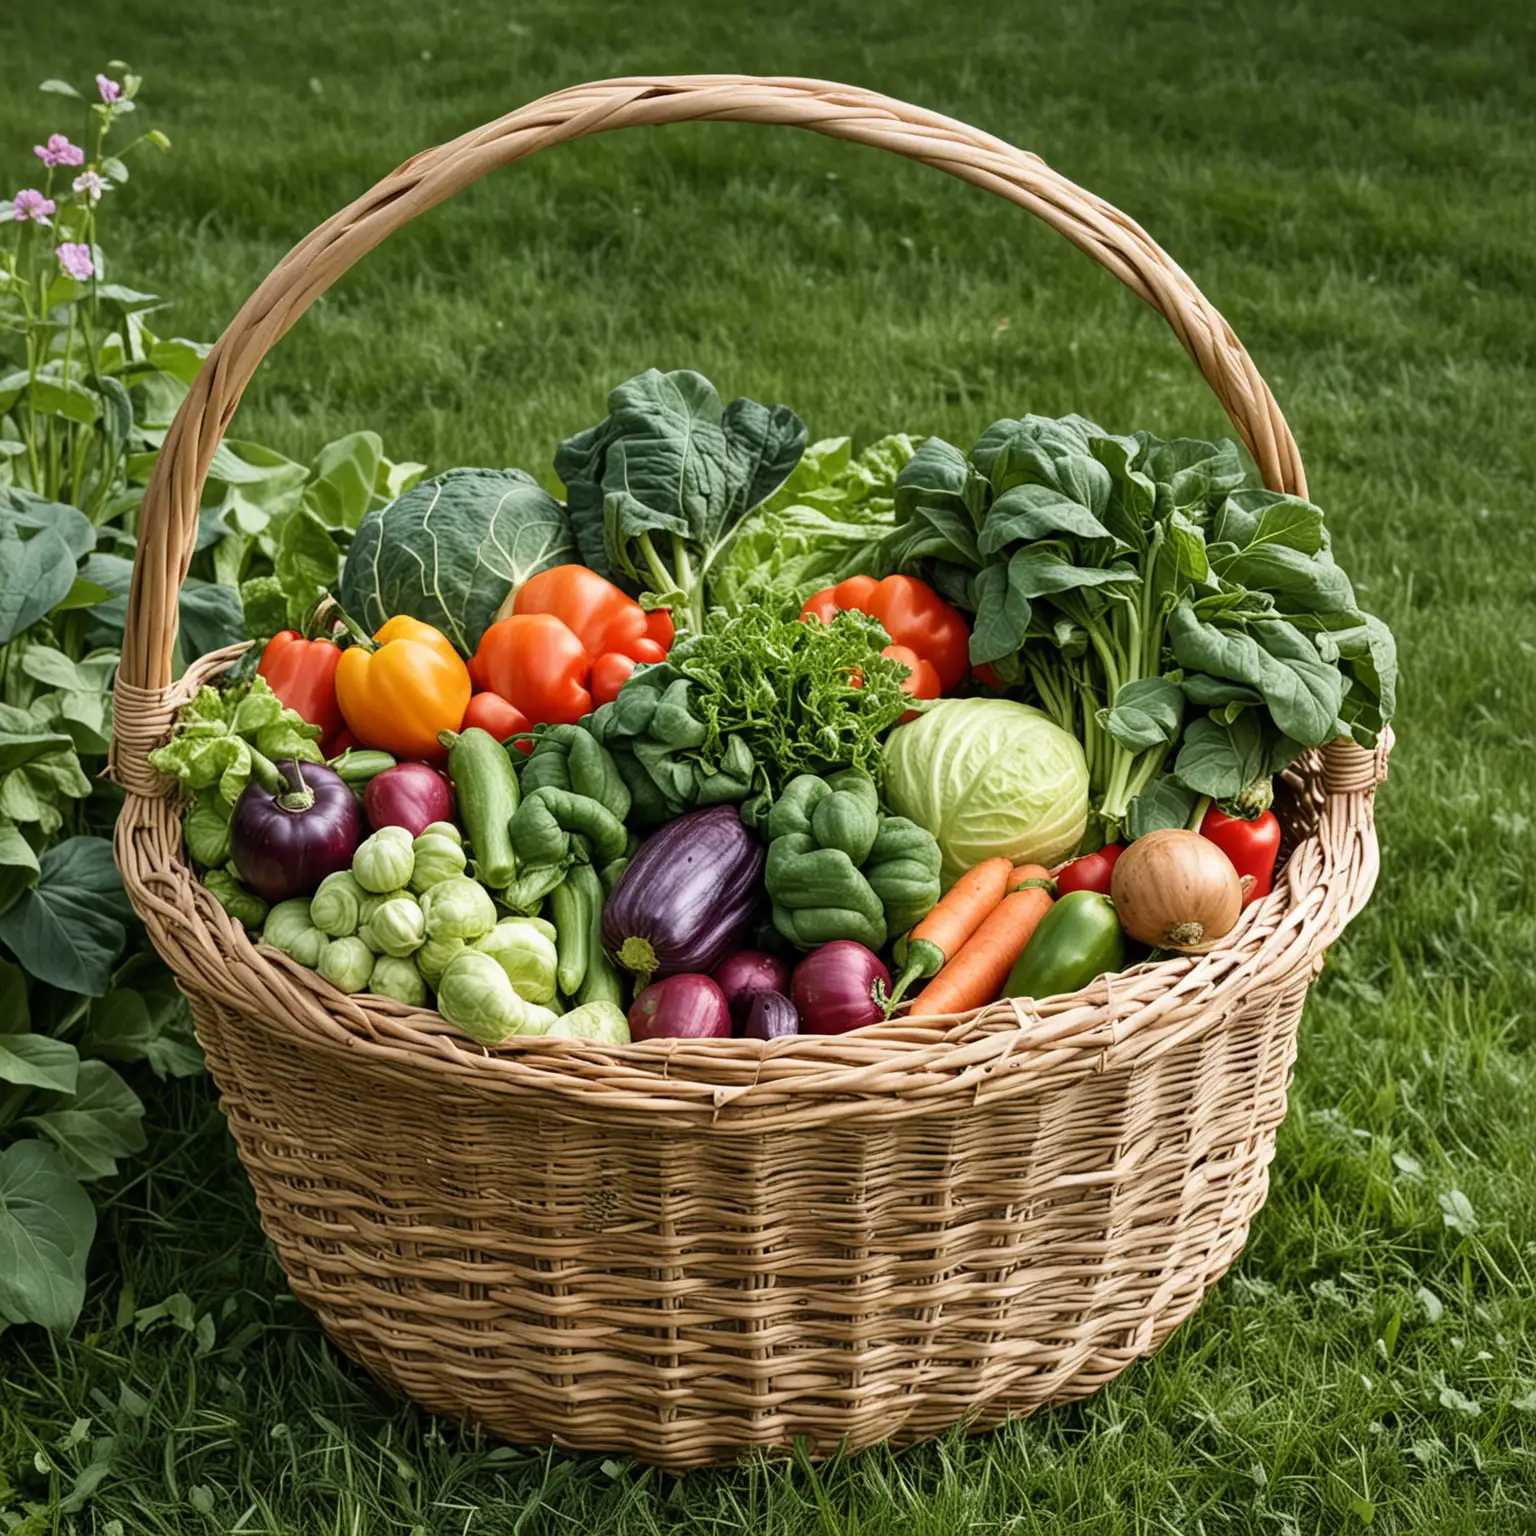 Harvesting Fresh Garden Vegetables Basket Overflowing with Colorful Produce